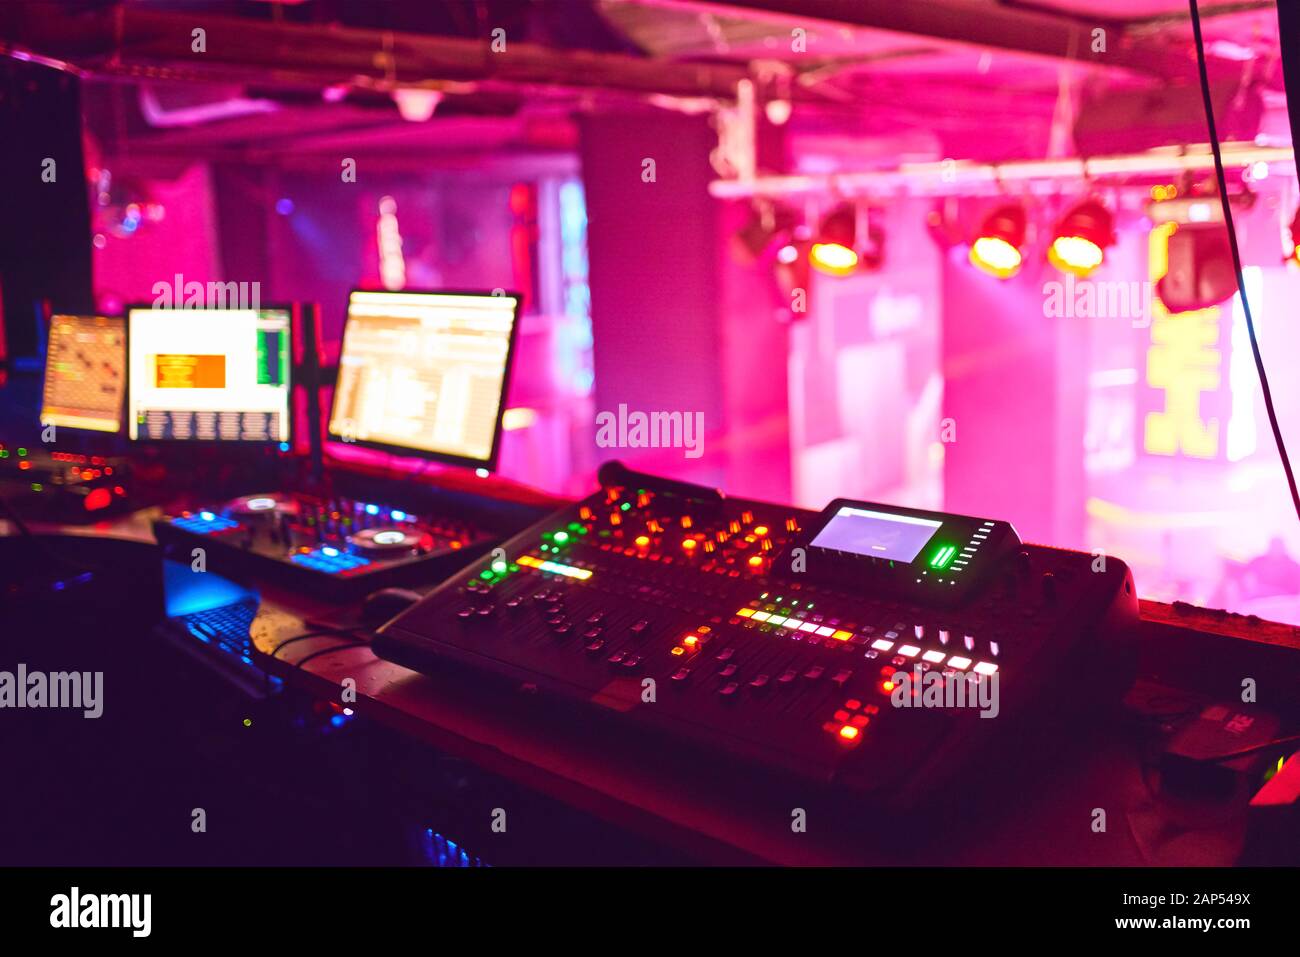 DJ work at a nightclub, Music club party, Concert equipment, a mixer and DJ console. The concept of disco, entertainment, holiday. Soft focus picture Stock Photo